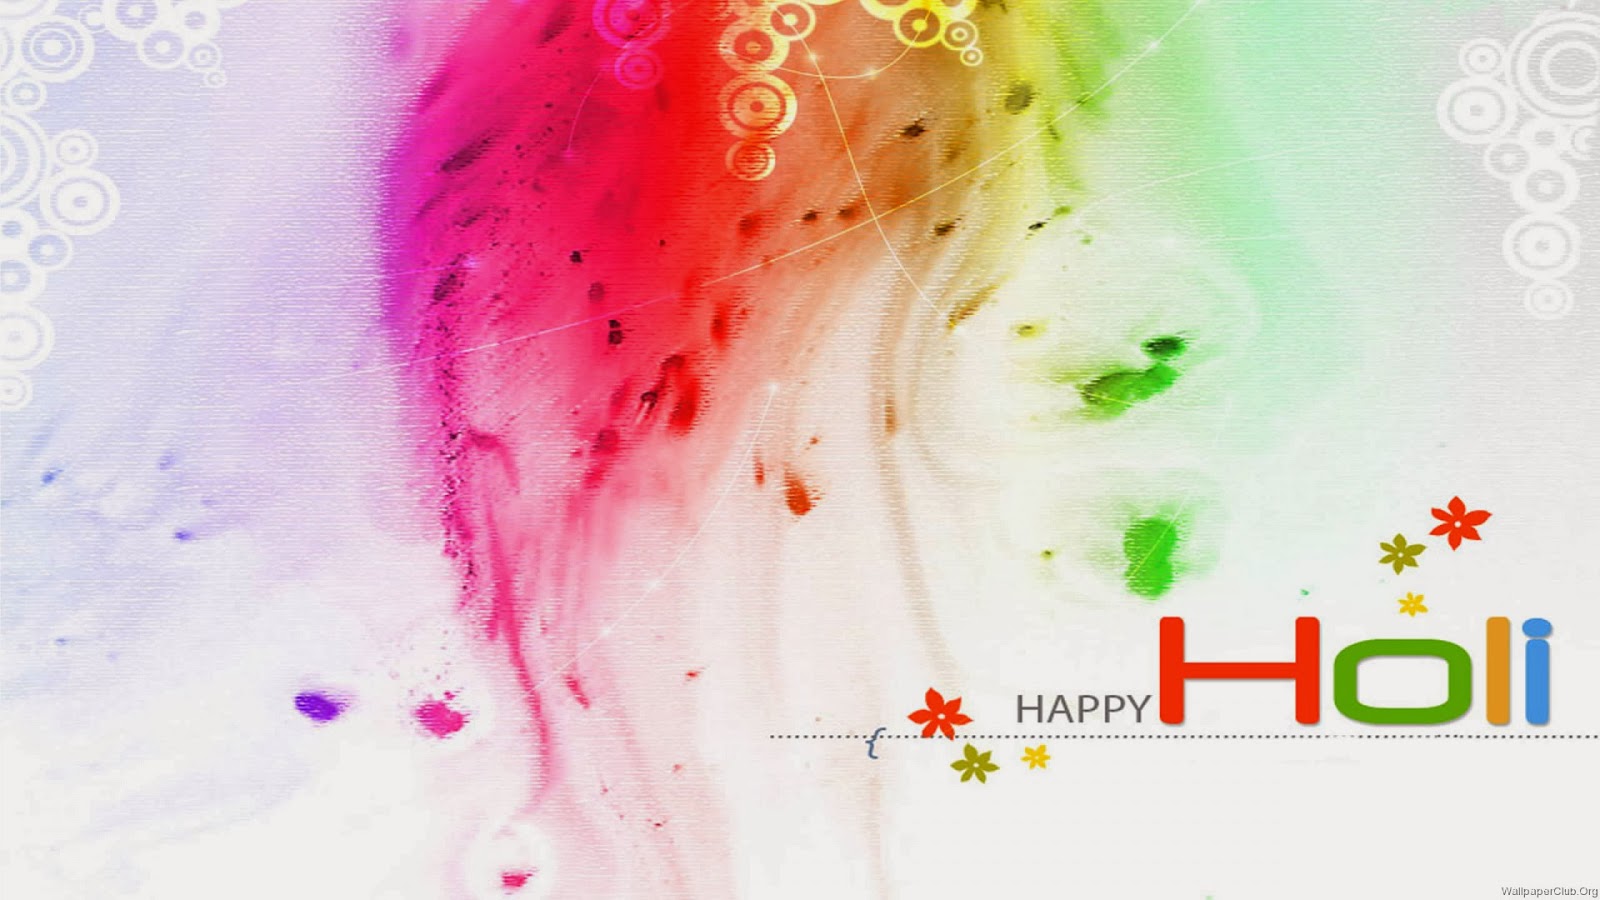 Festival Chaska: Happy Holi HD Images for Facebook, Whatsapp Friends